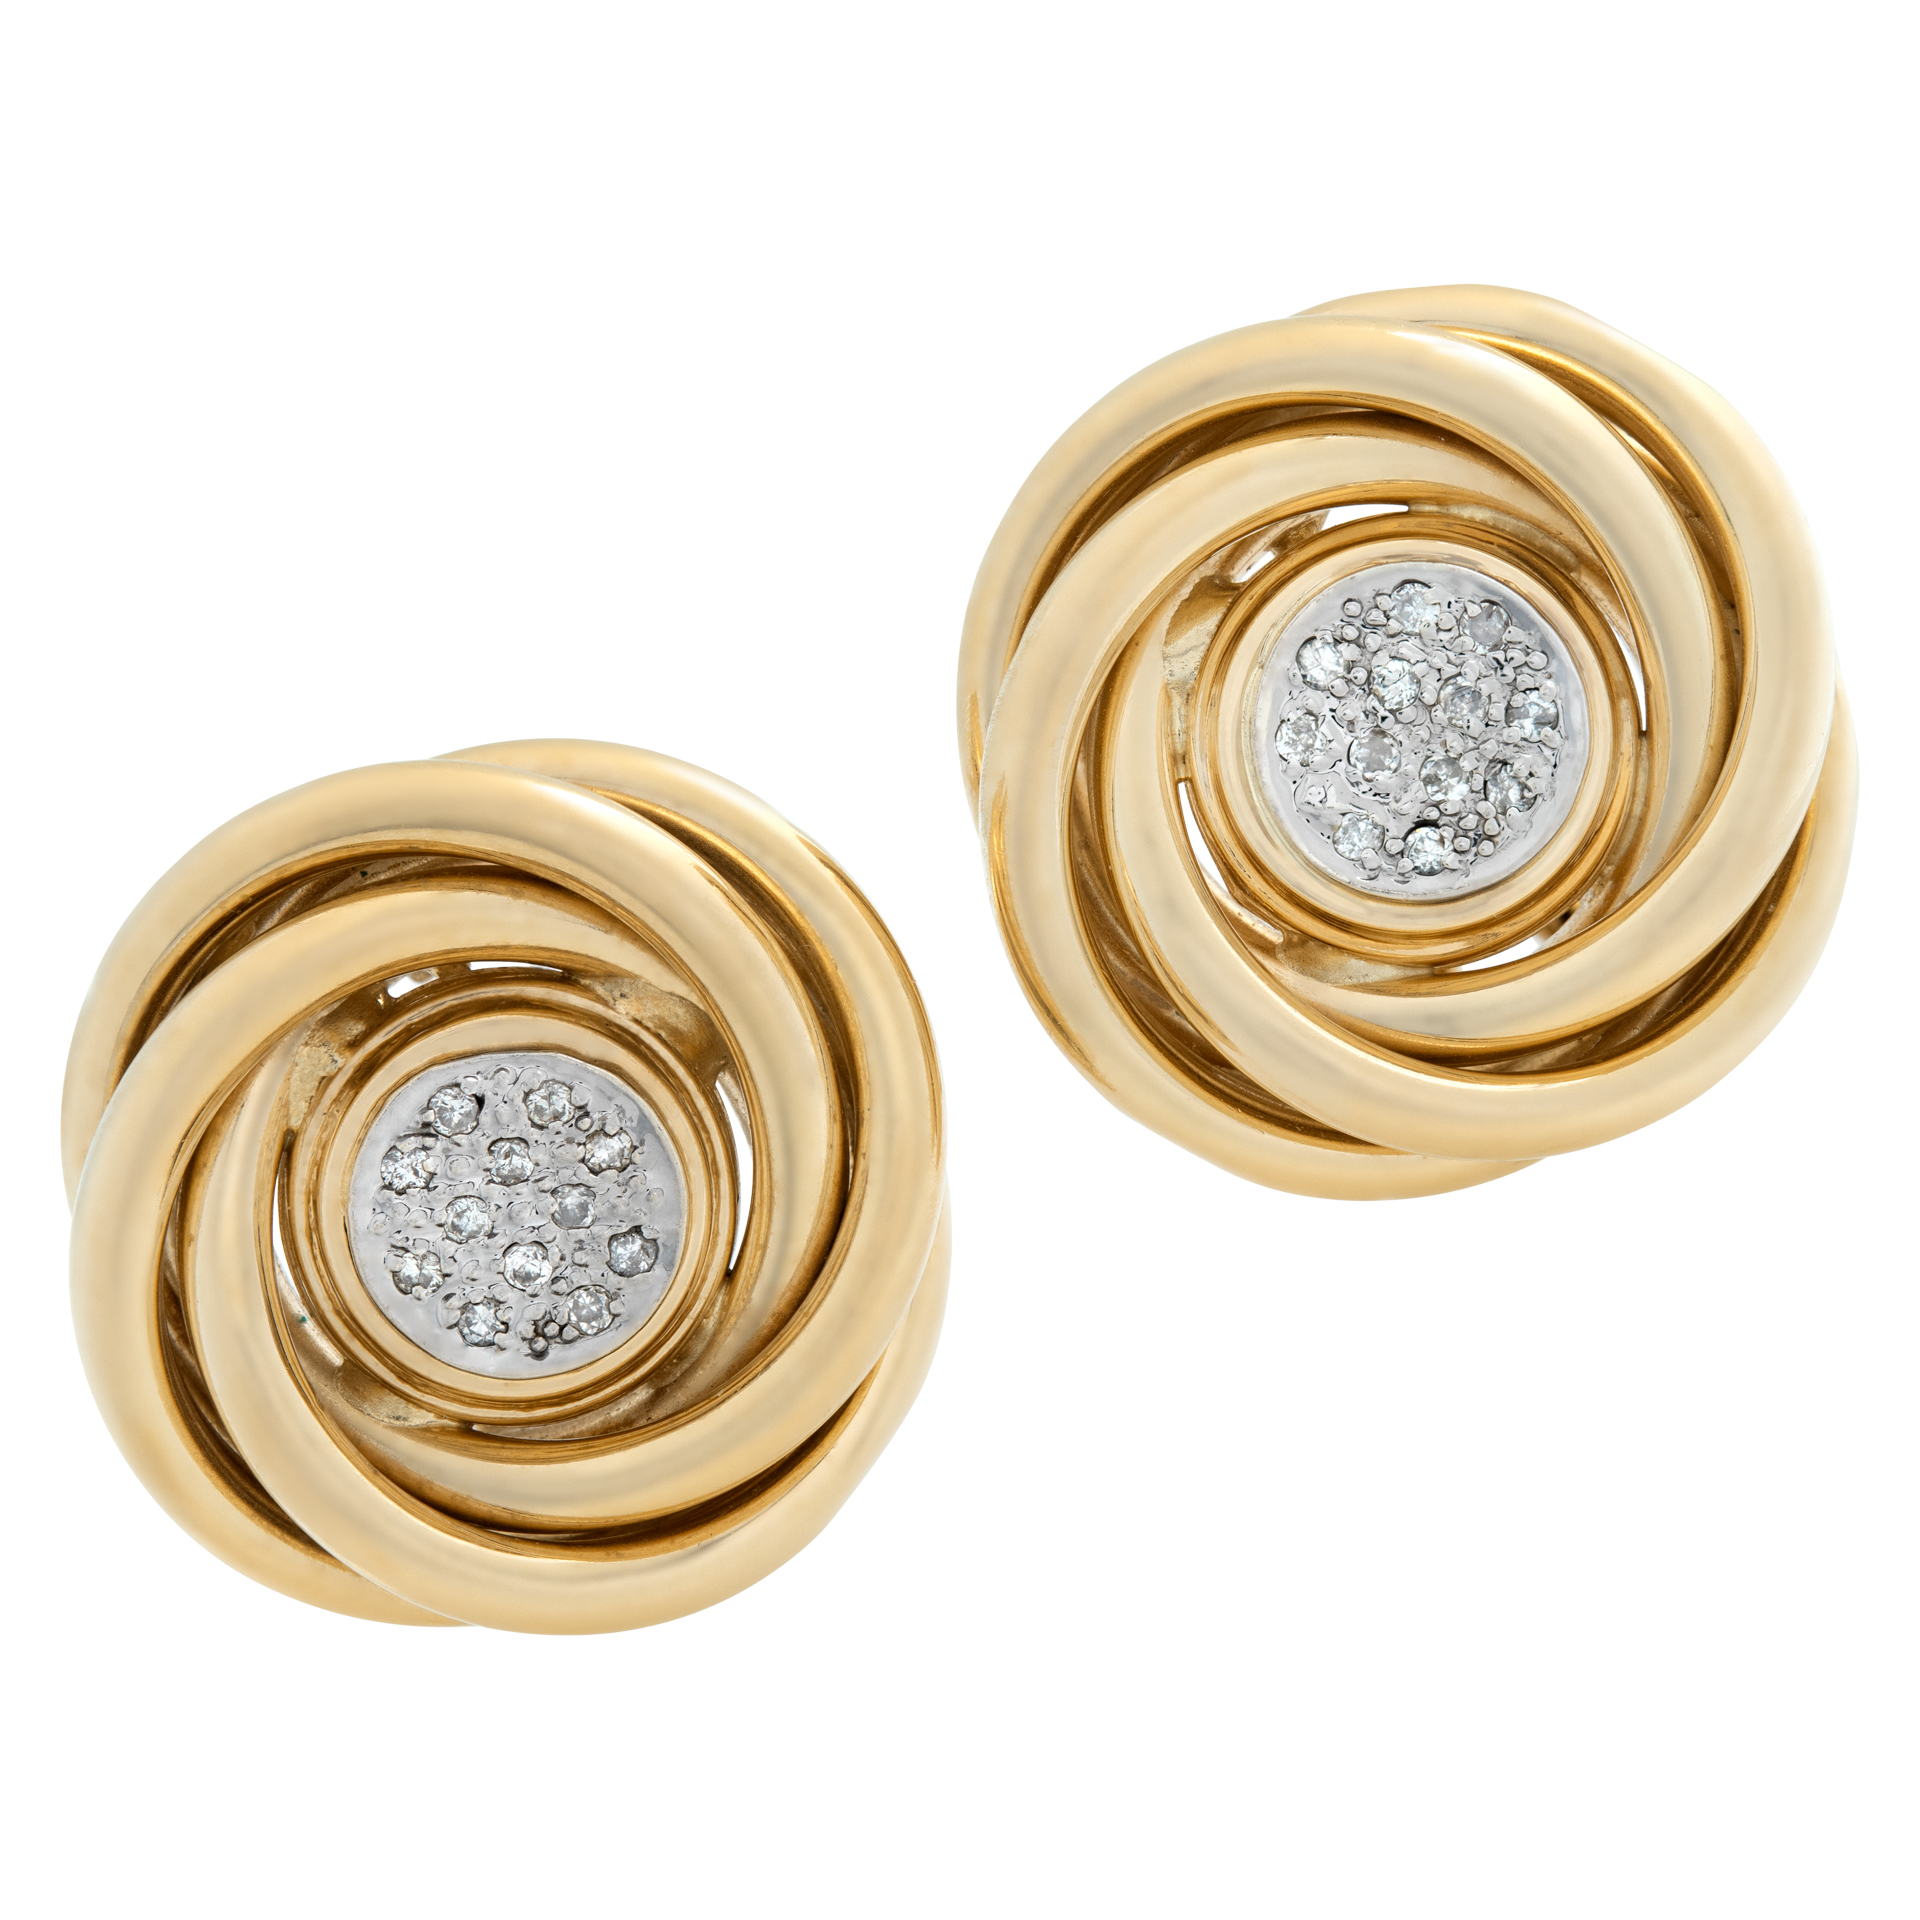 Classic Knot earrings with pave diamonds center, set in 14K yellow gold. 20mm diameter. image 1